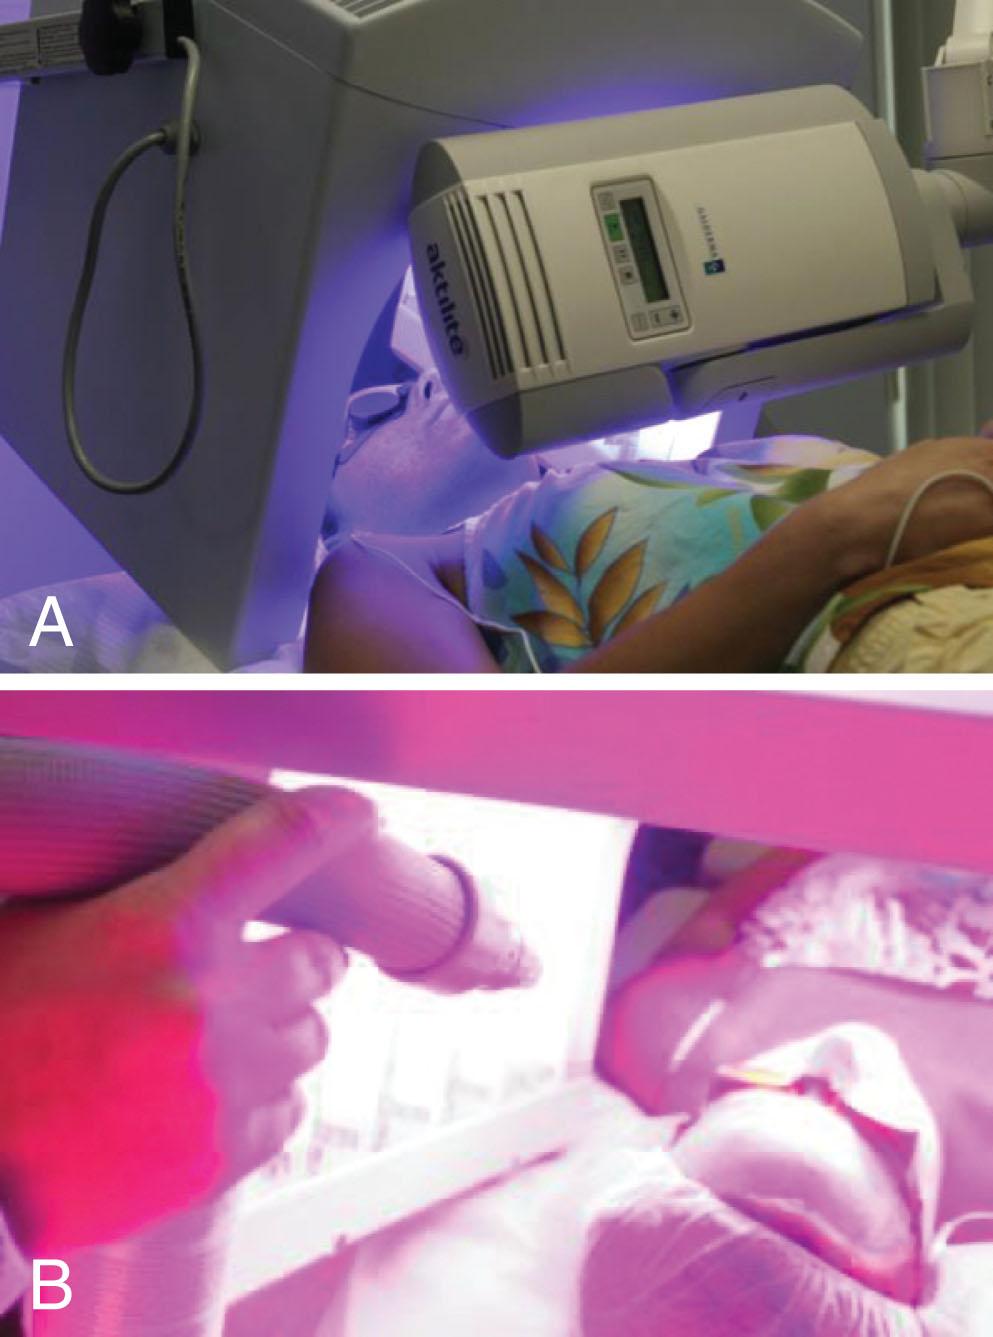 Fig. 14.4, Simultaneous treatment with red and blue light (A). Cool air is directed at the patient to maintain comfort (B).